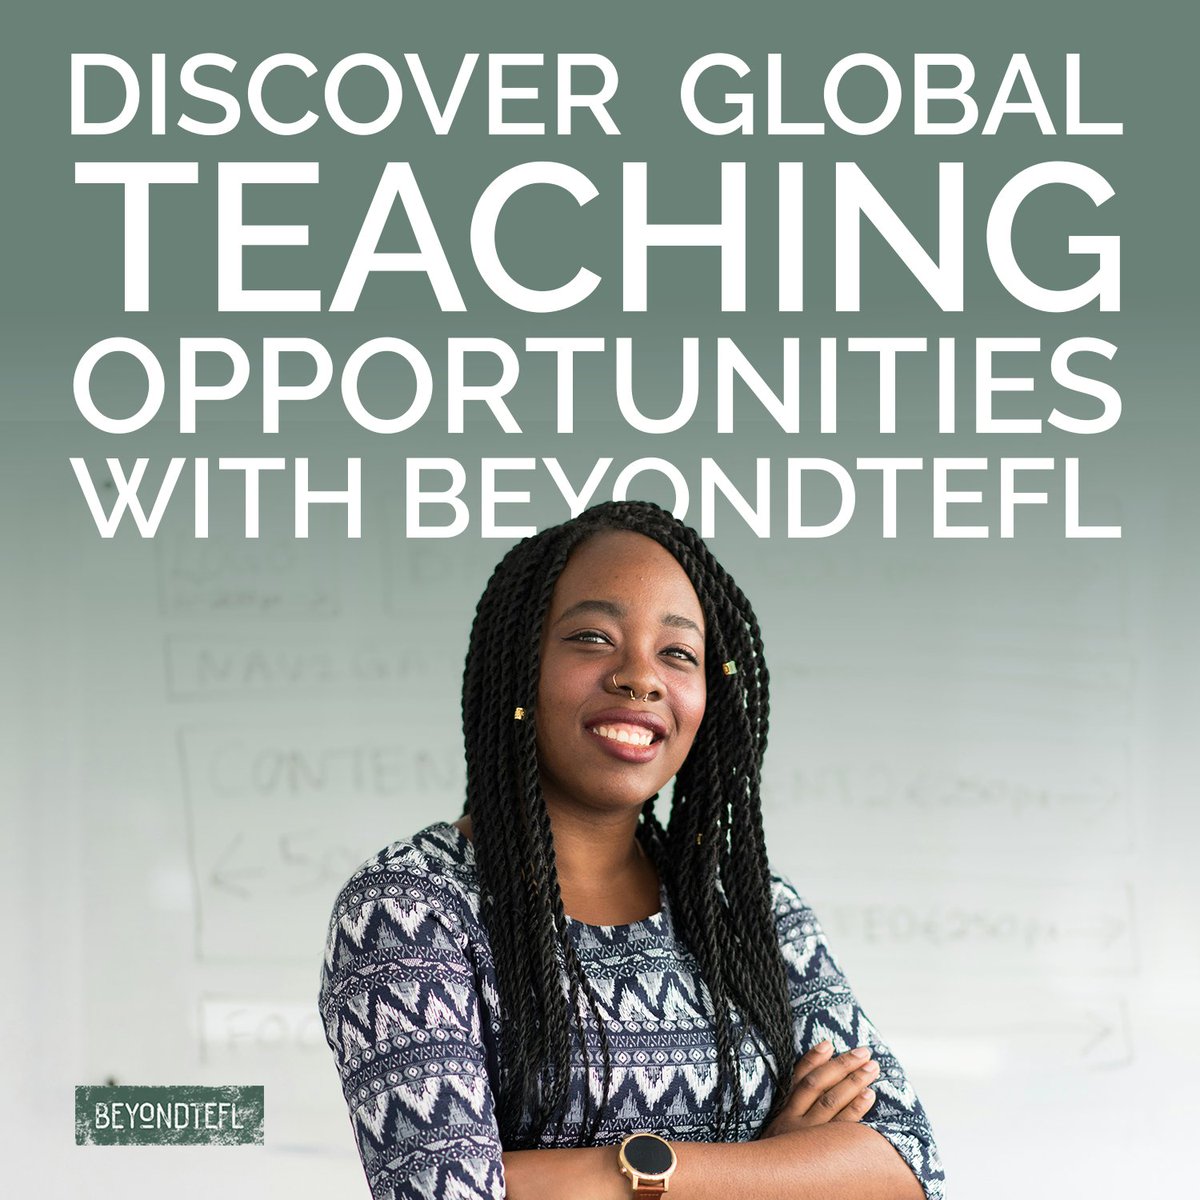 Find the best #teachingjobs abroad. Discover the best teaching jobs at top provider companies: beyondtefl.com/jobs/ #BeyondTEFL  #TeachingAbroad #GlobalOpportunities